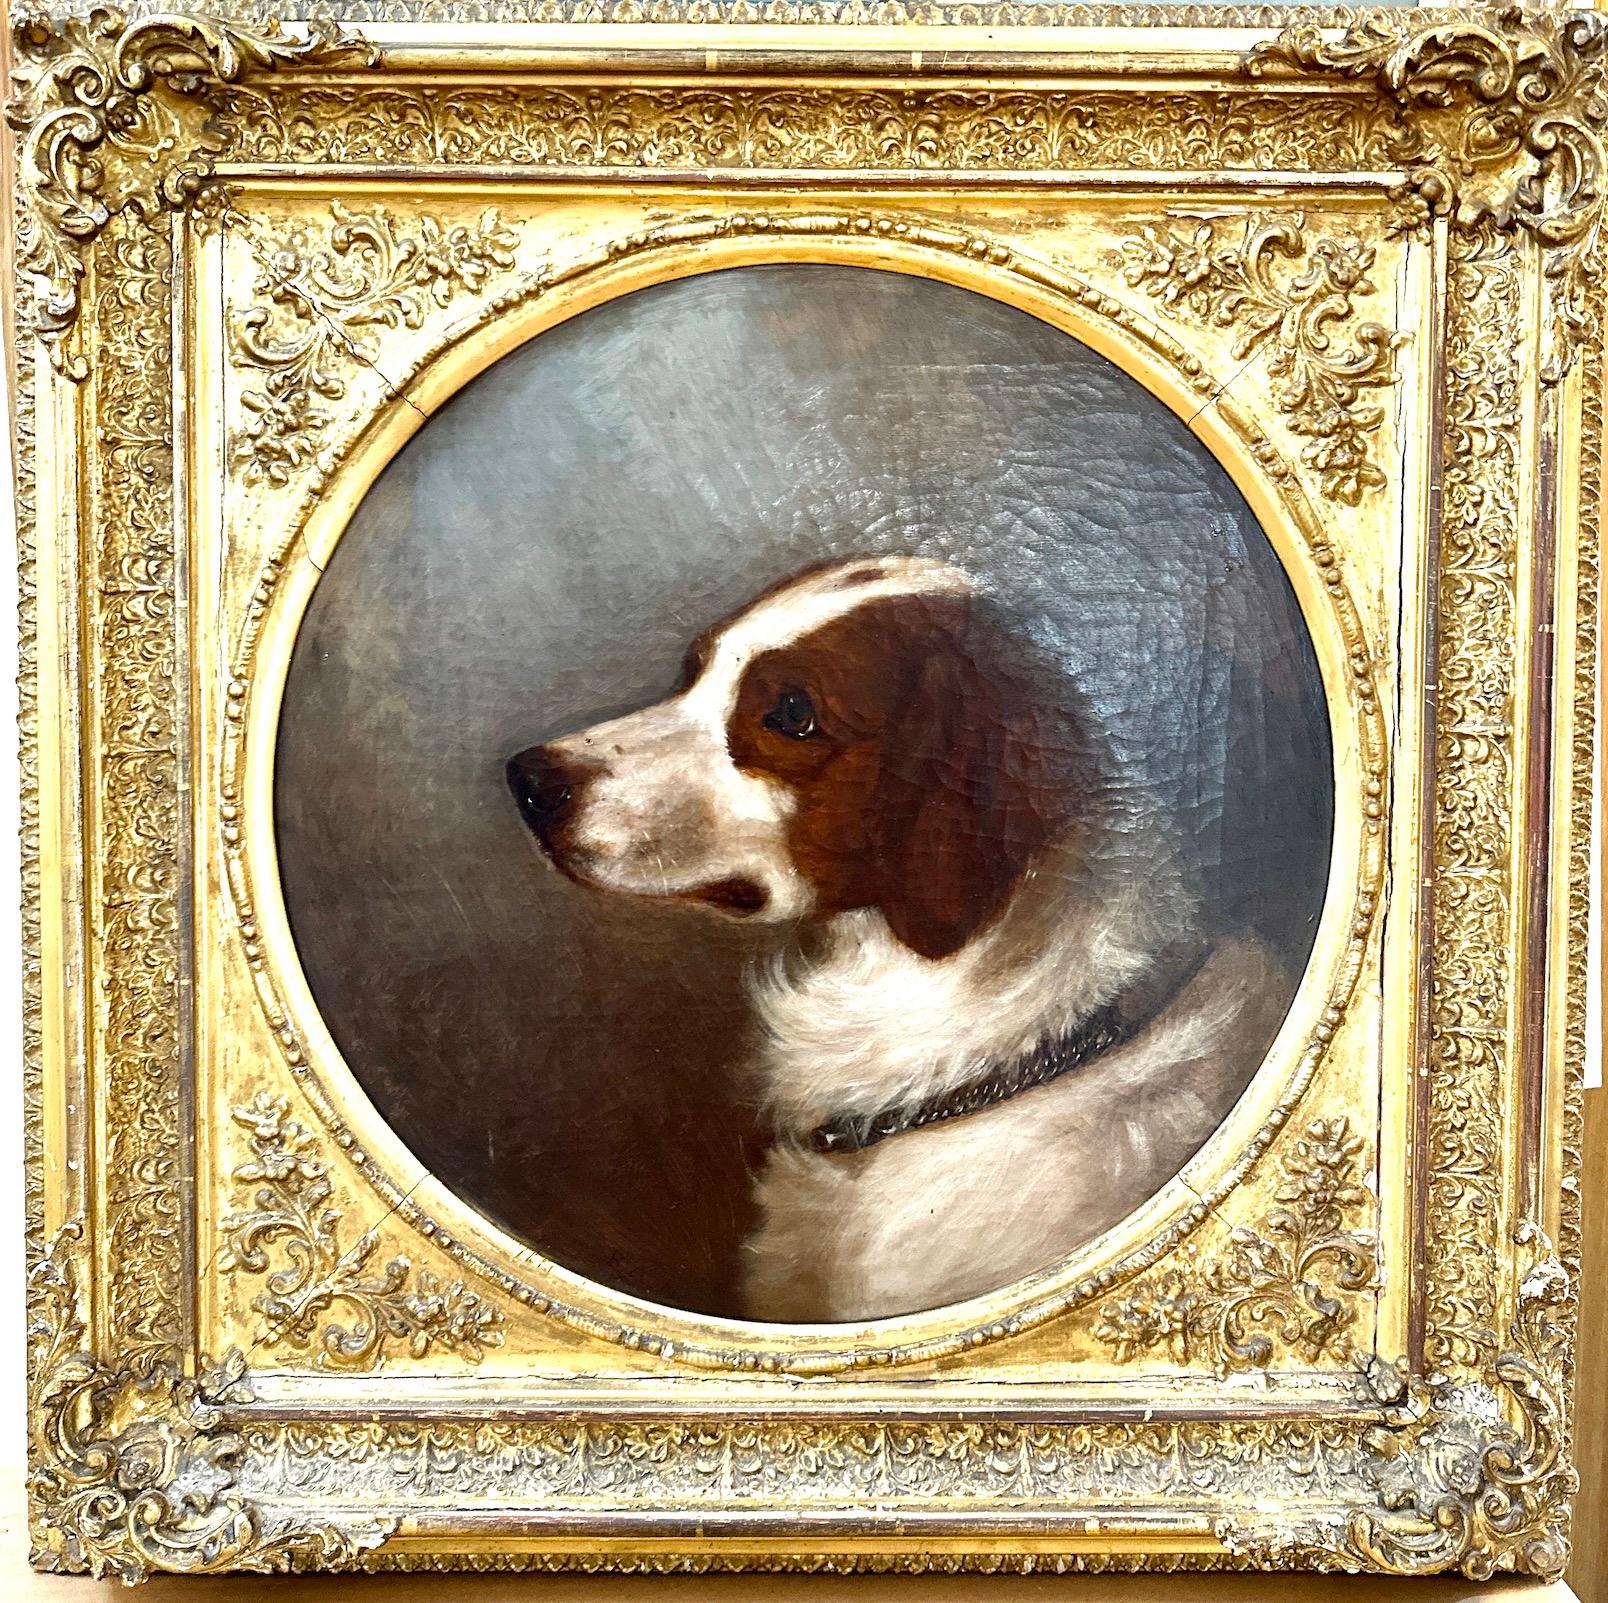 George Earl Animal Painting - English Victorian 19th century portrait of a brown and white Spaniel dog